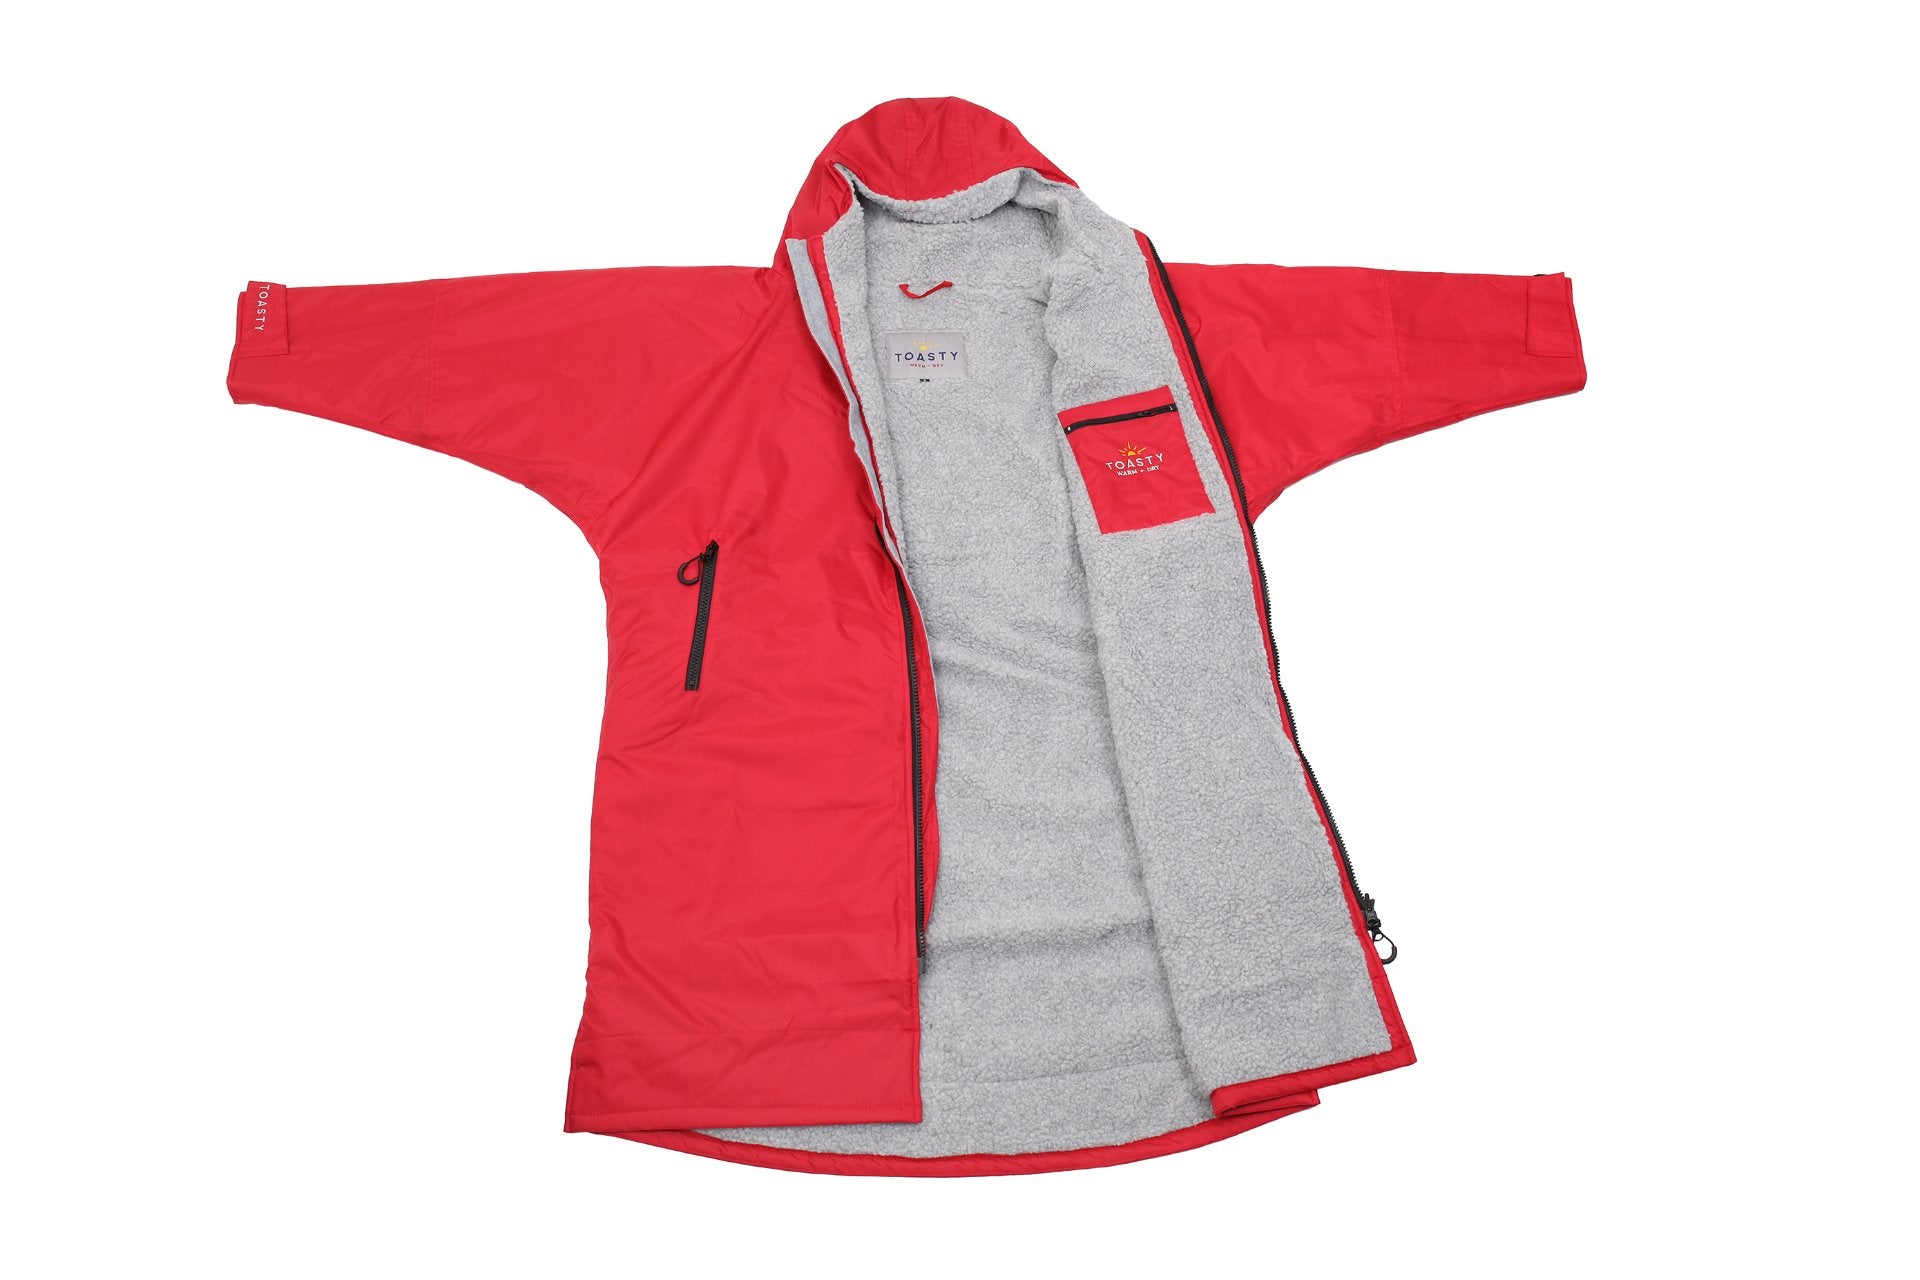 Toasty Kids Red Ultimate changing jacket in Red Open zip